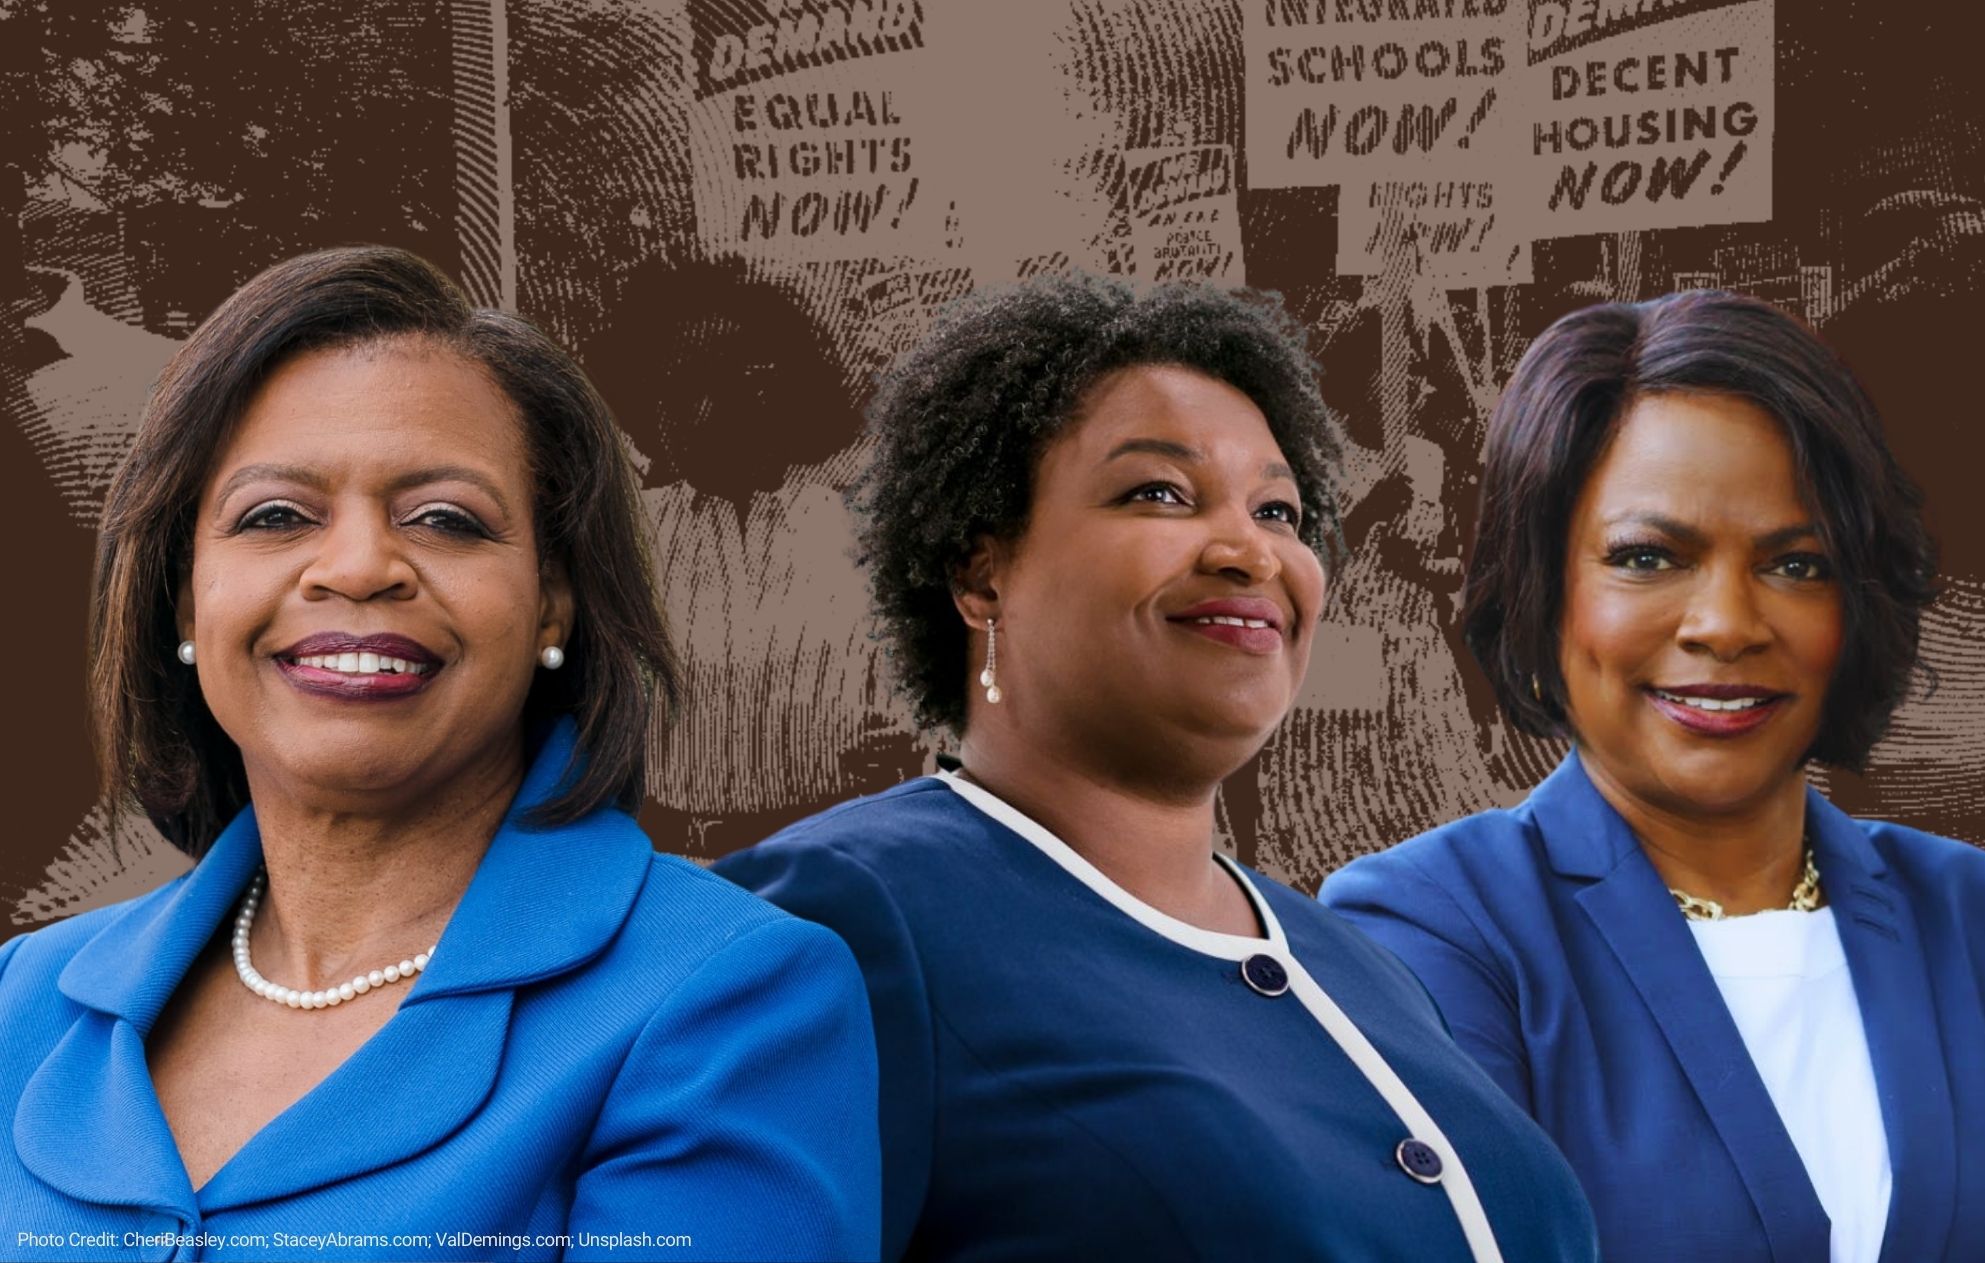 Cheri Beasley, Stacey Abrams and Val Demings